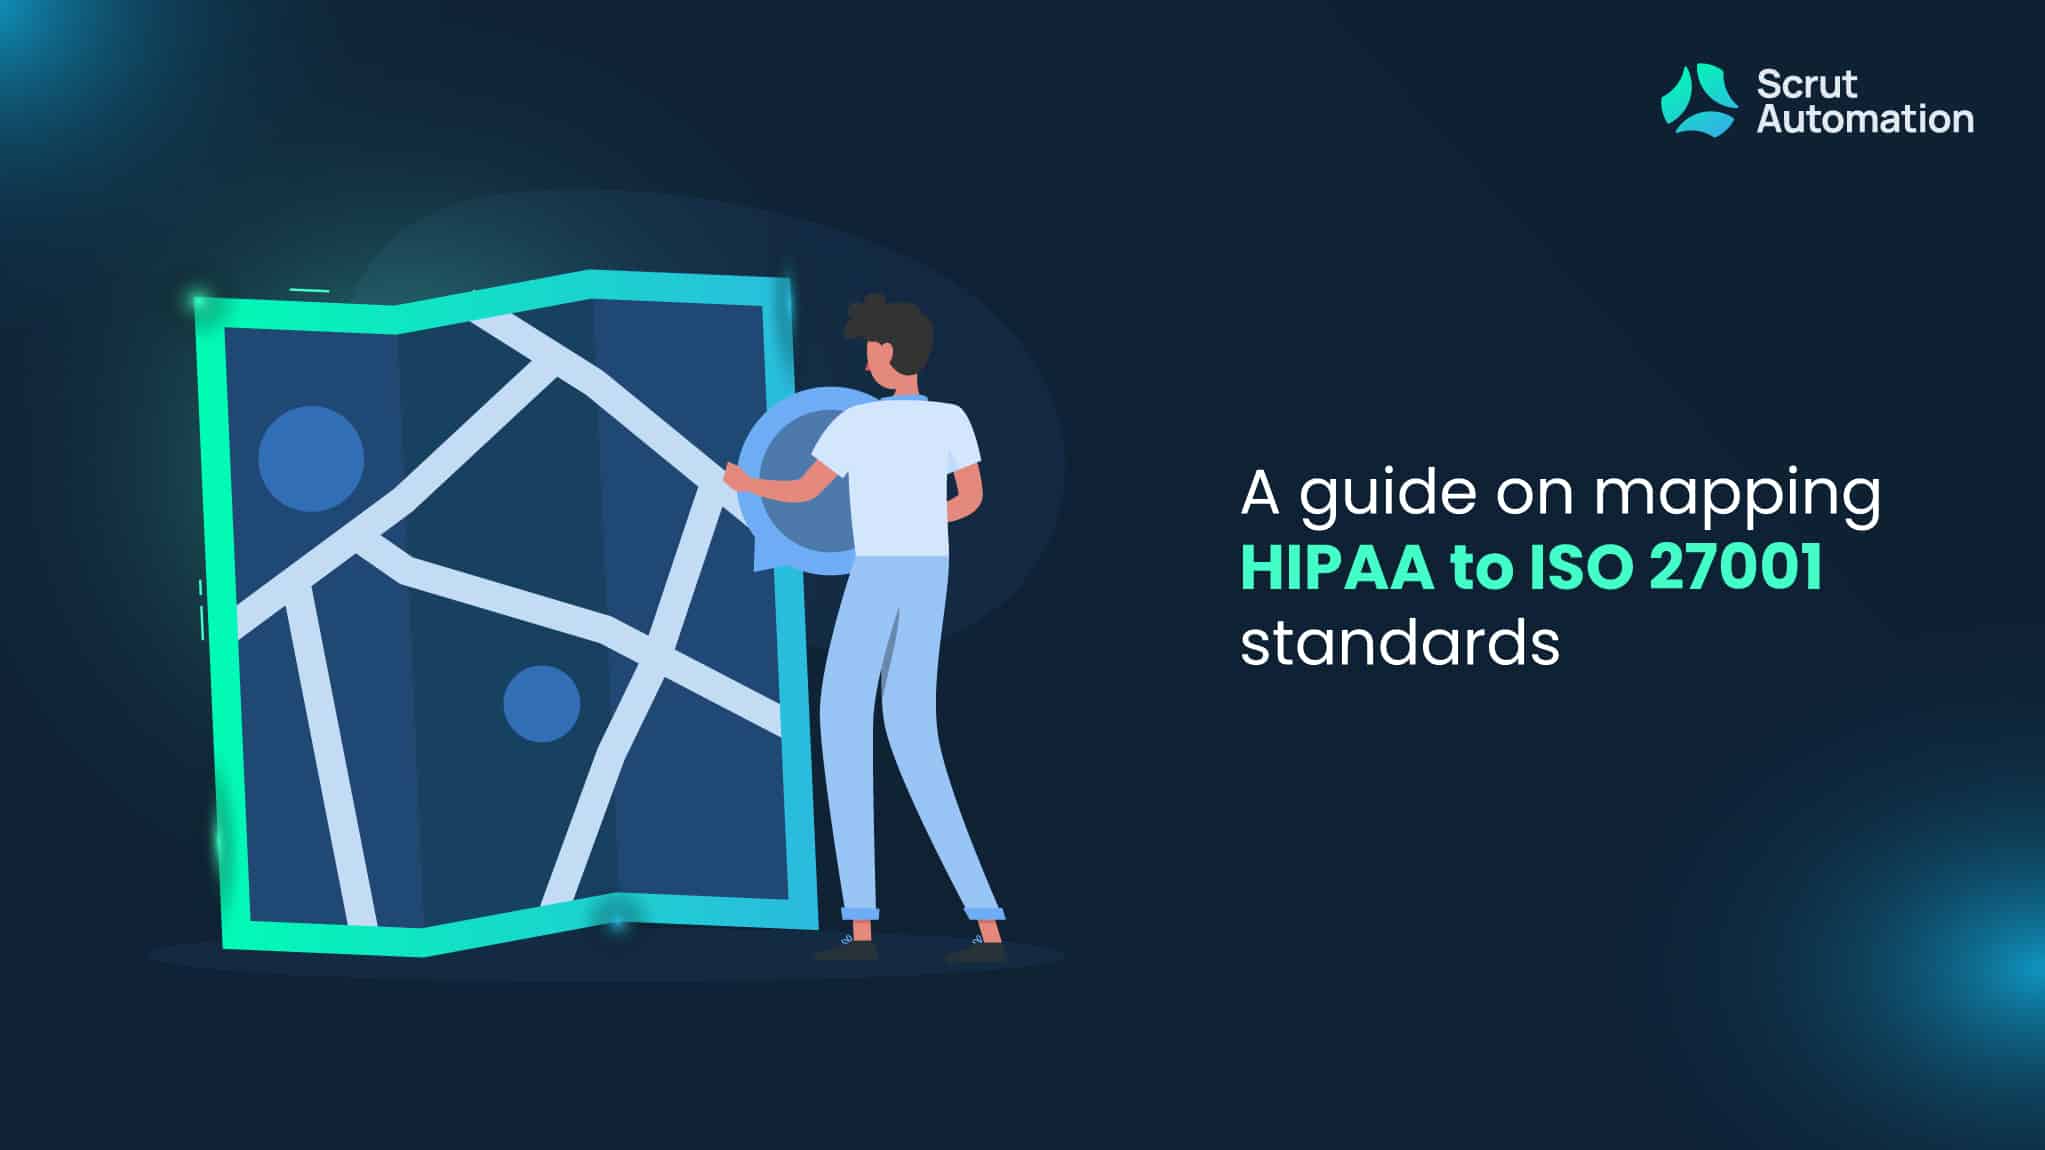 How to map HIPAA to ISO 27001